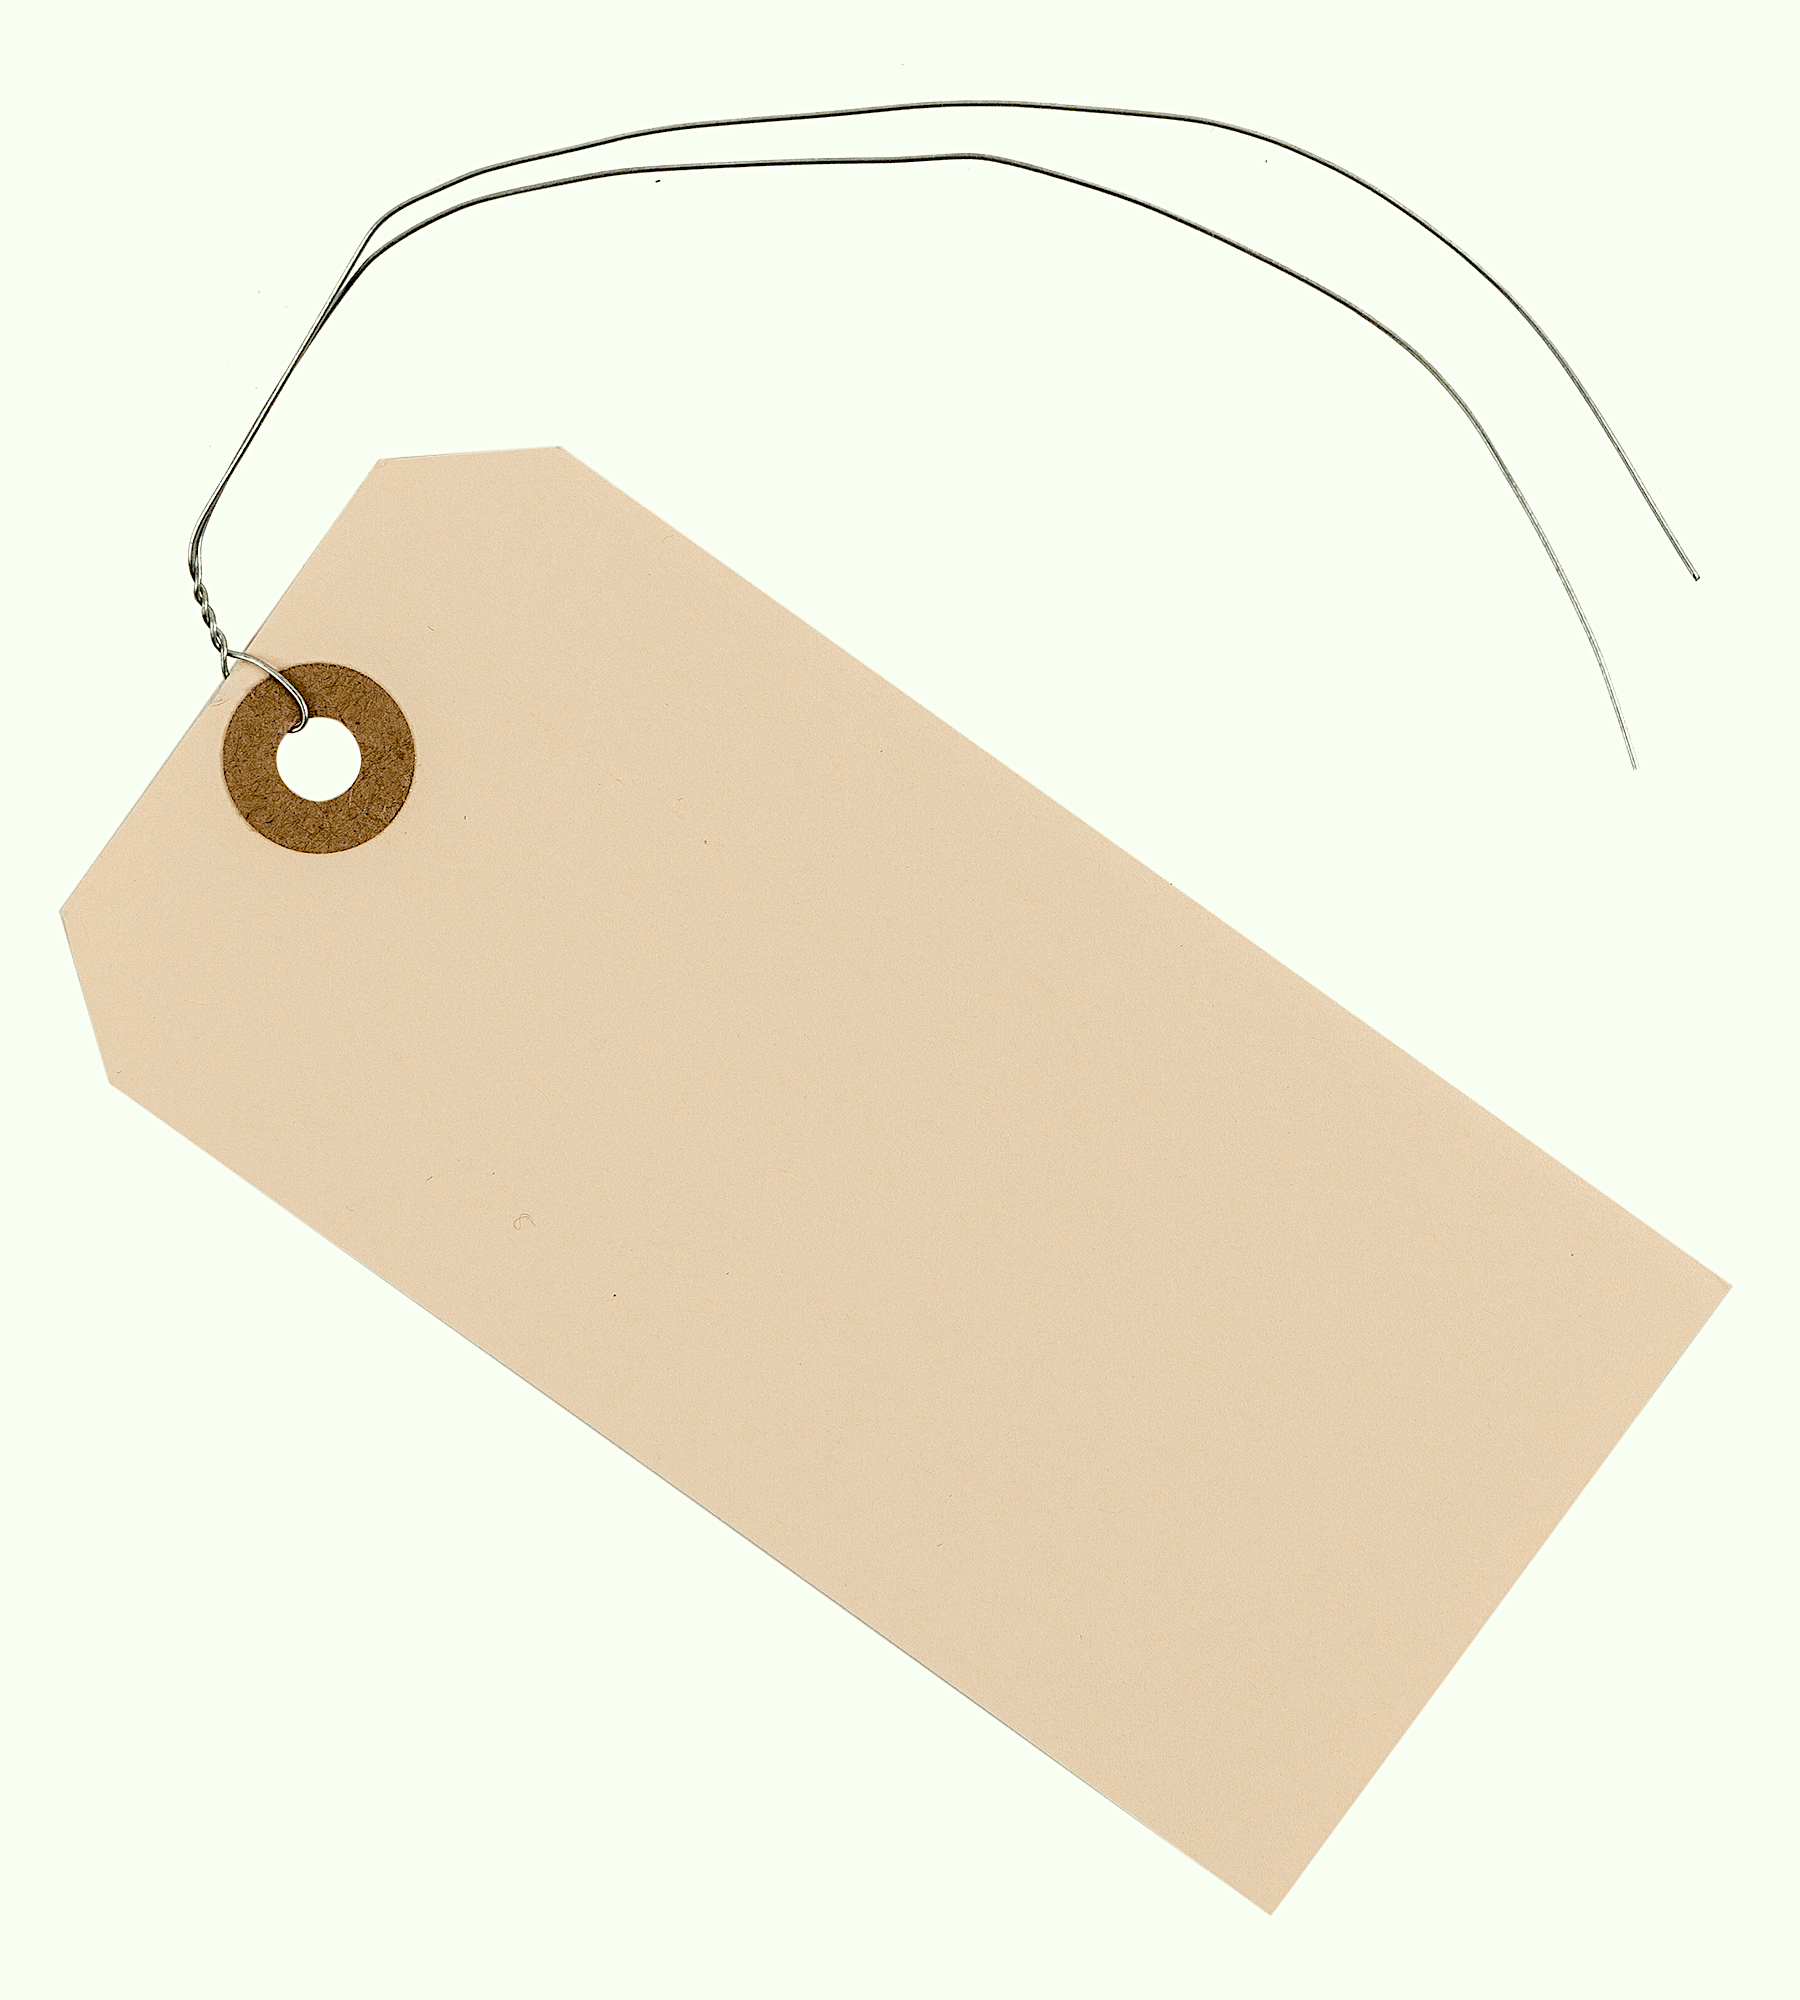 Manila Paper Tags #5 with Wire Attached 4 3/4 x 2 3/8 (12 x 6 cm) Box of  100 Blank Shipping Tags Wired with Reinforced Hole and Metal Wire Ties -  EZDOM Tags